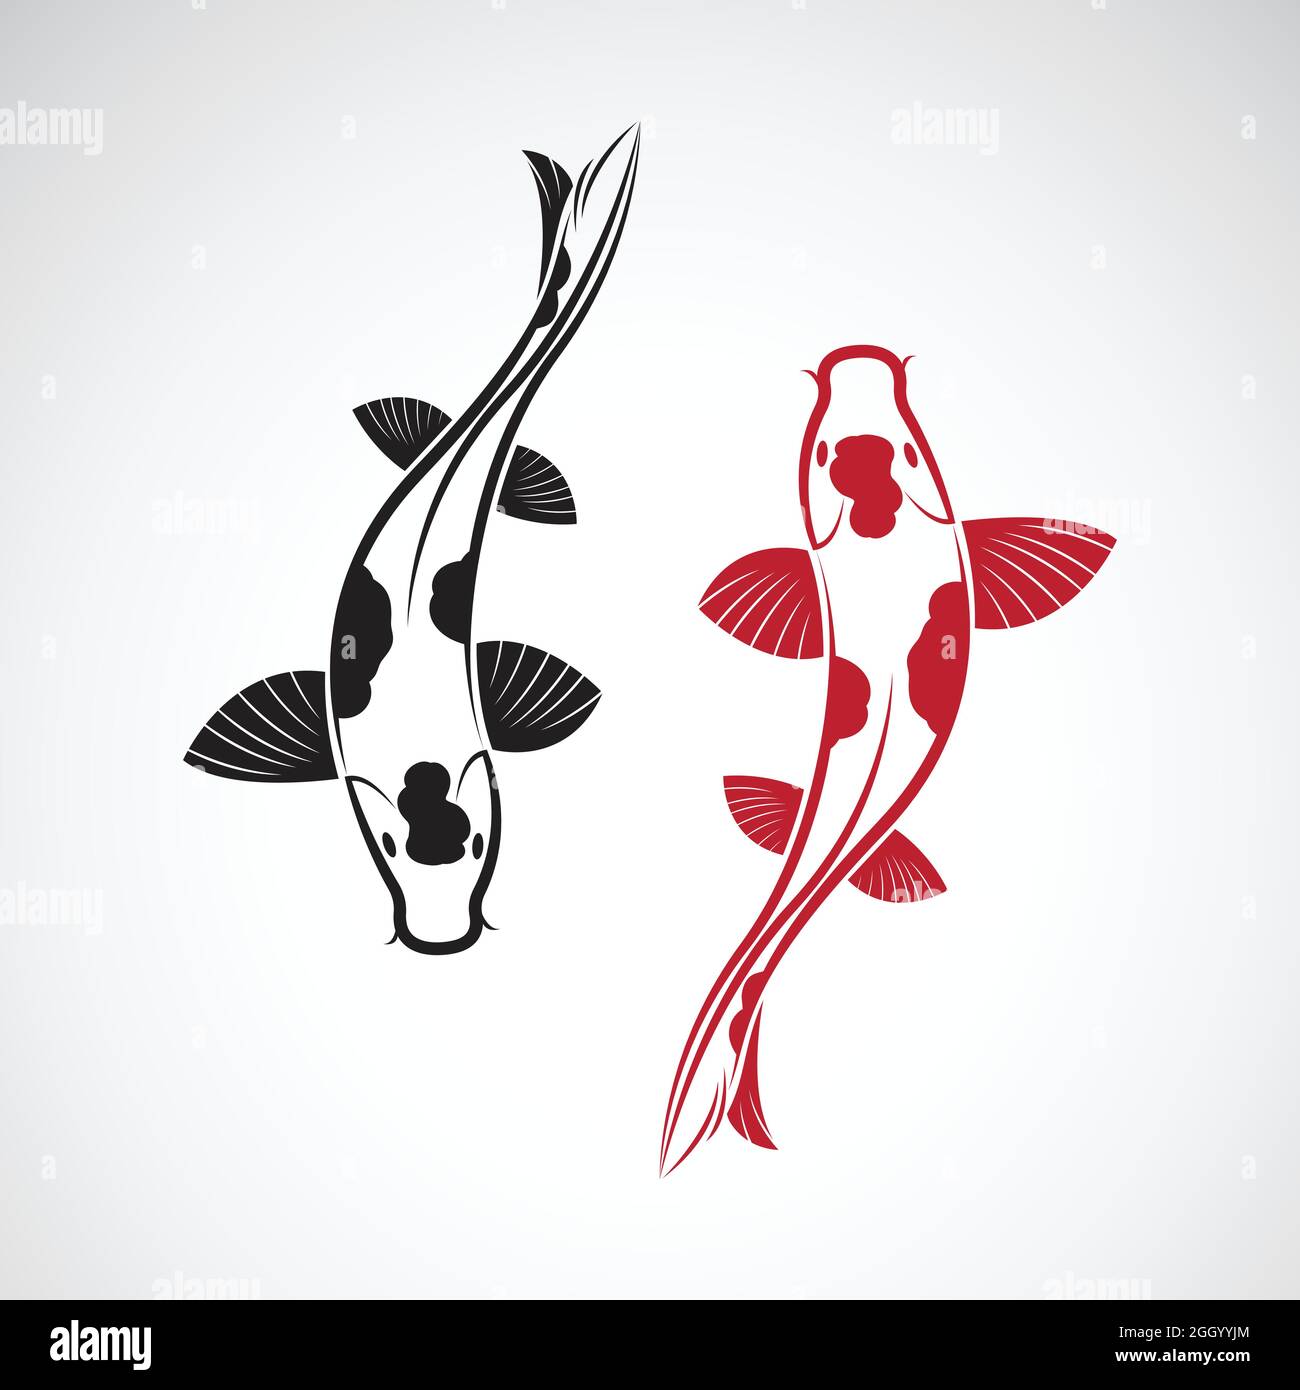 Vector of carp koi fish isolated on white background. Pet Animal. Fish icon. Easy editable layered vector illustration. Stock Vector